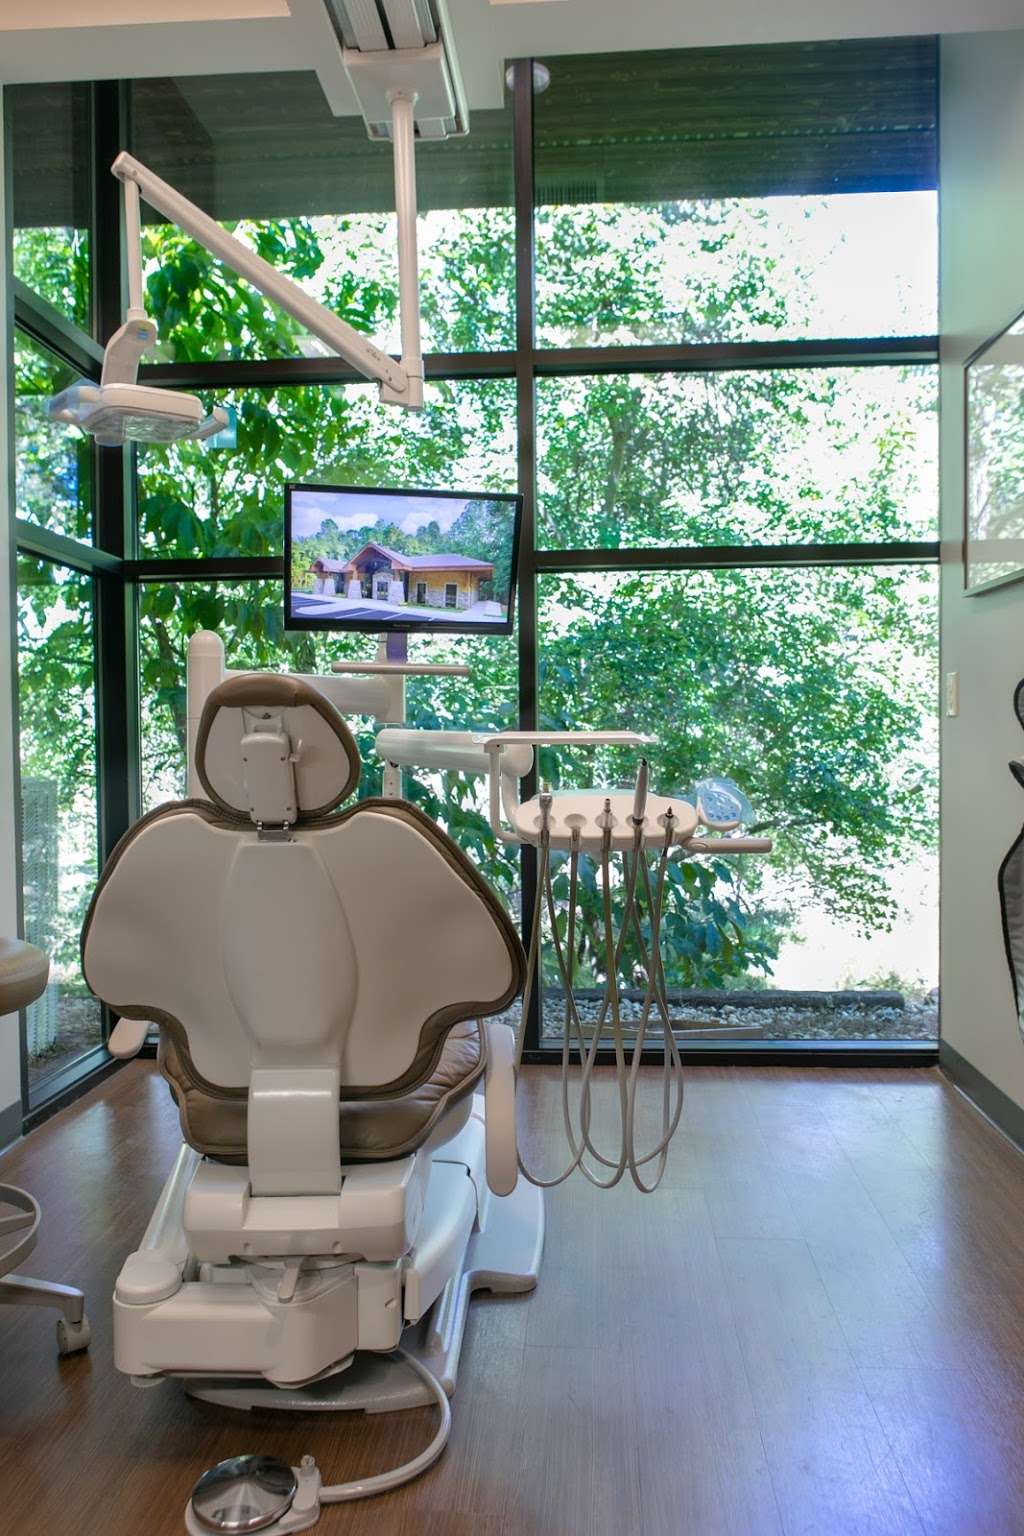 Reimels Family & Cosmetic Dentistry | 13605 Reese Blvd W, Huntersville, NC 28078, USA | Phone: (704) 948-1111